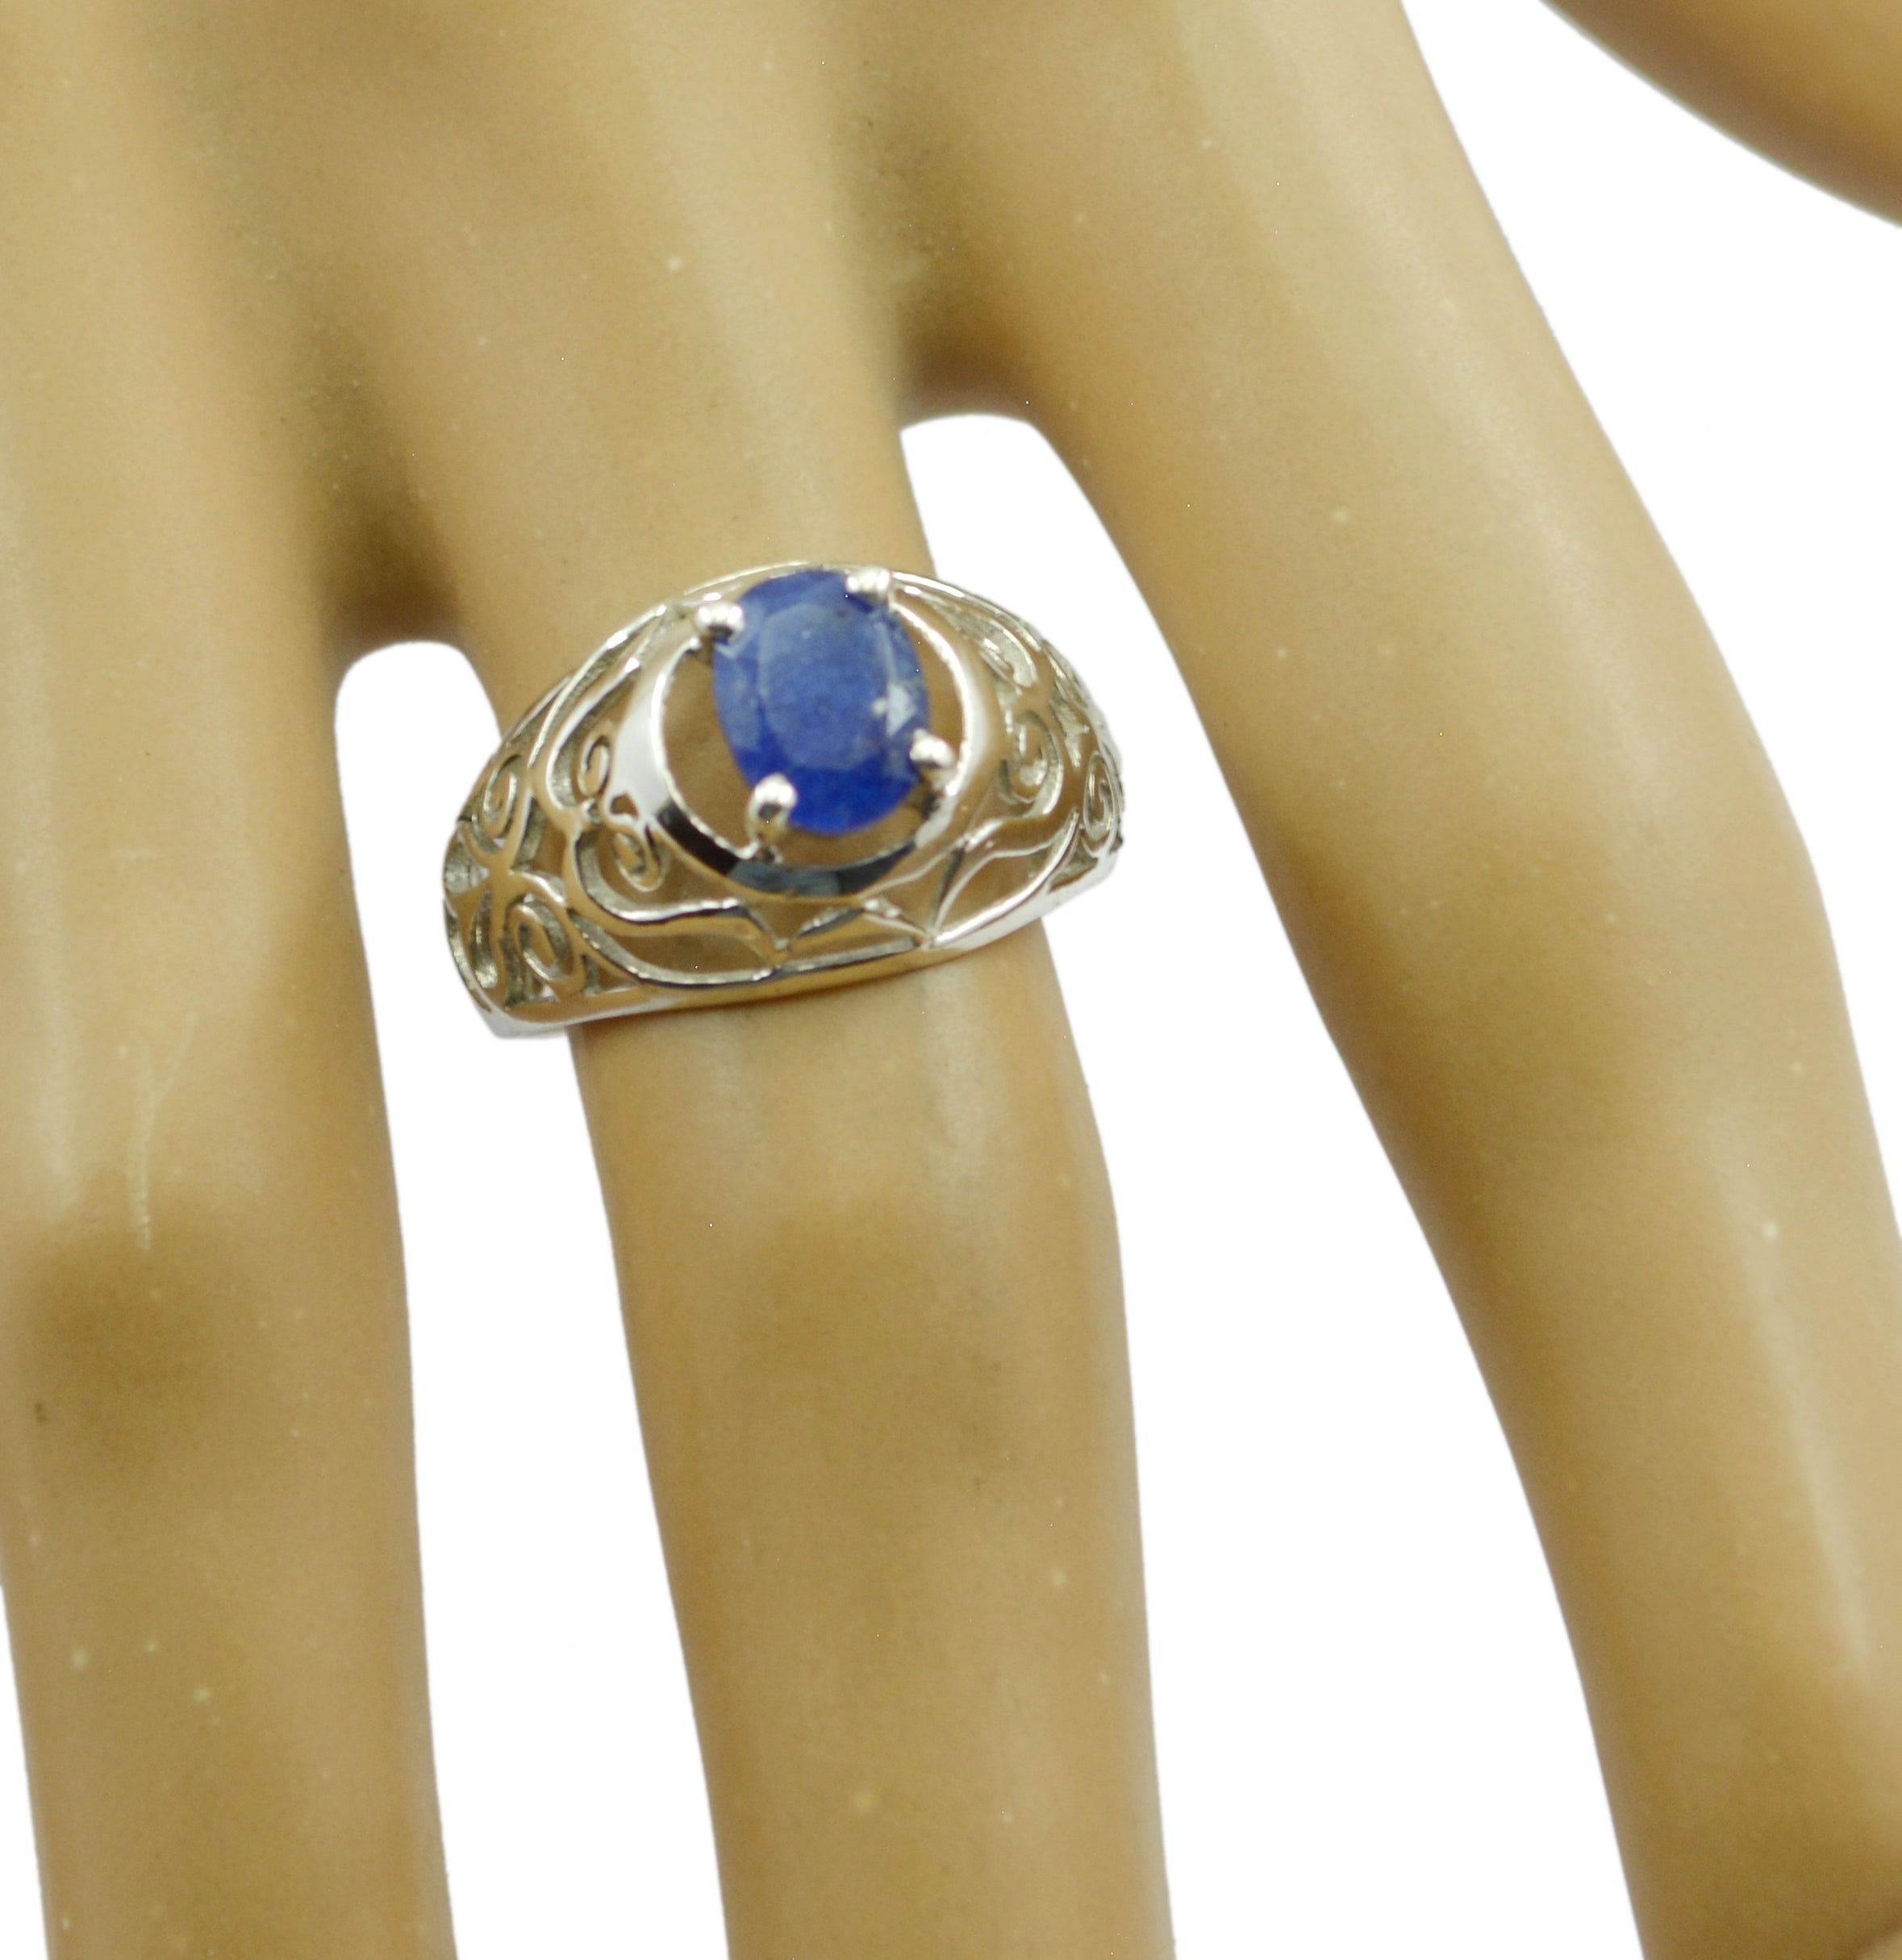 Nubile Gem Indiansapphire 925 Sterling Silver Ring Jewelry Supply Store